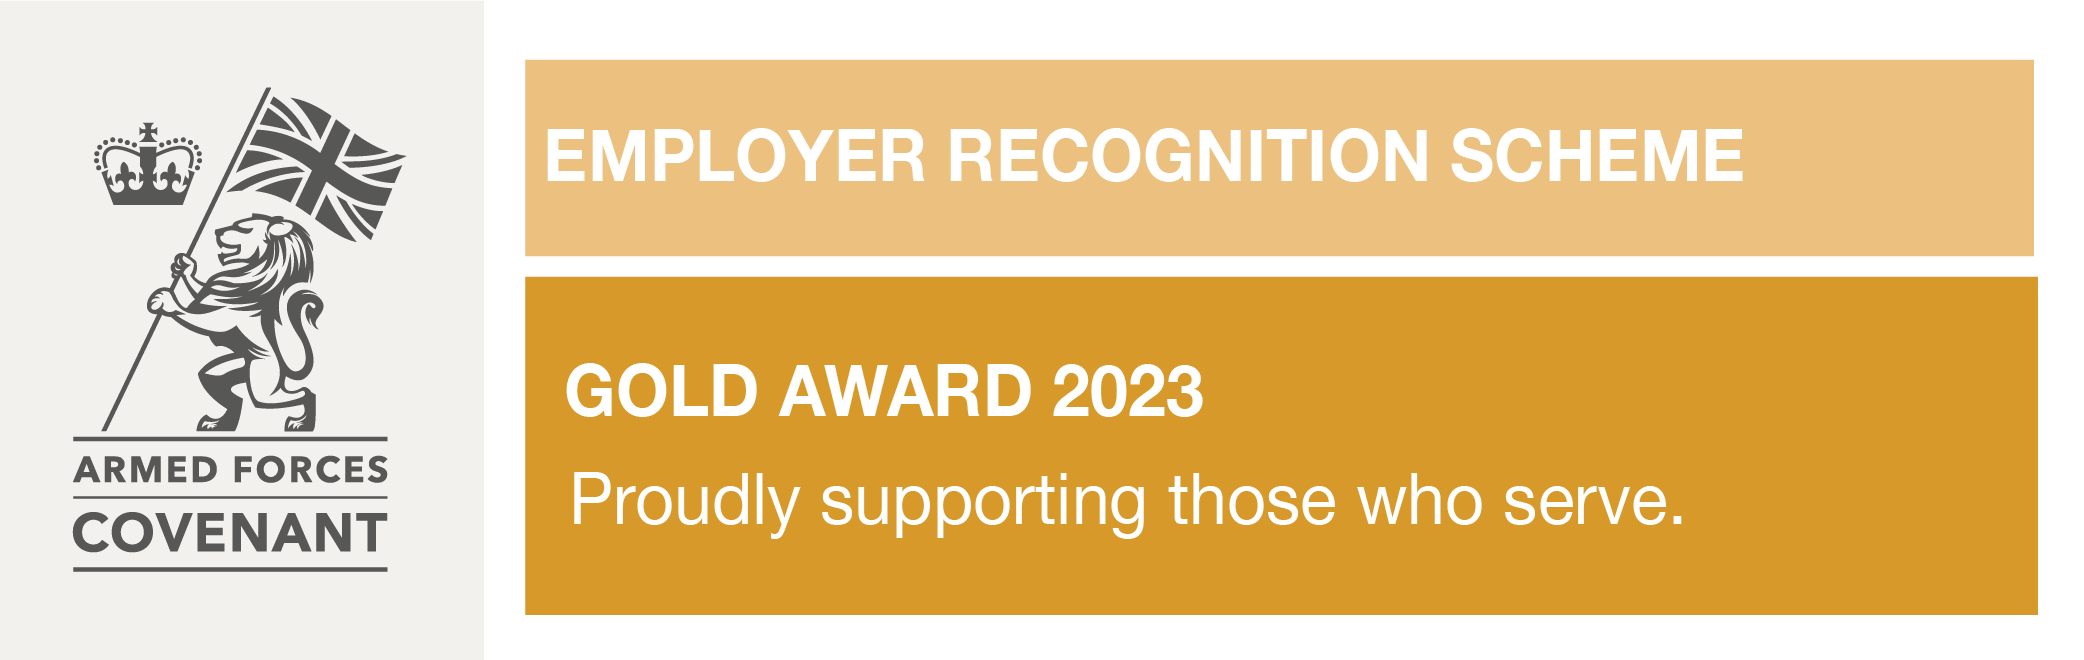 Employer recognition scheme - gold award 2023 - proudly supporting those who serve.